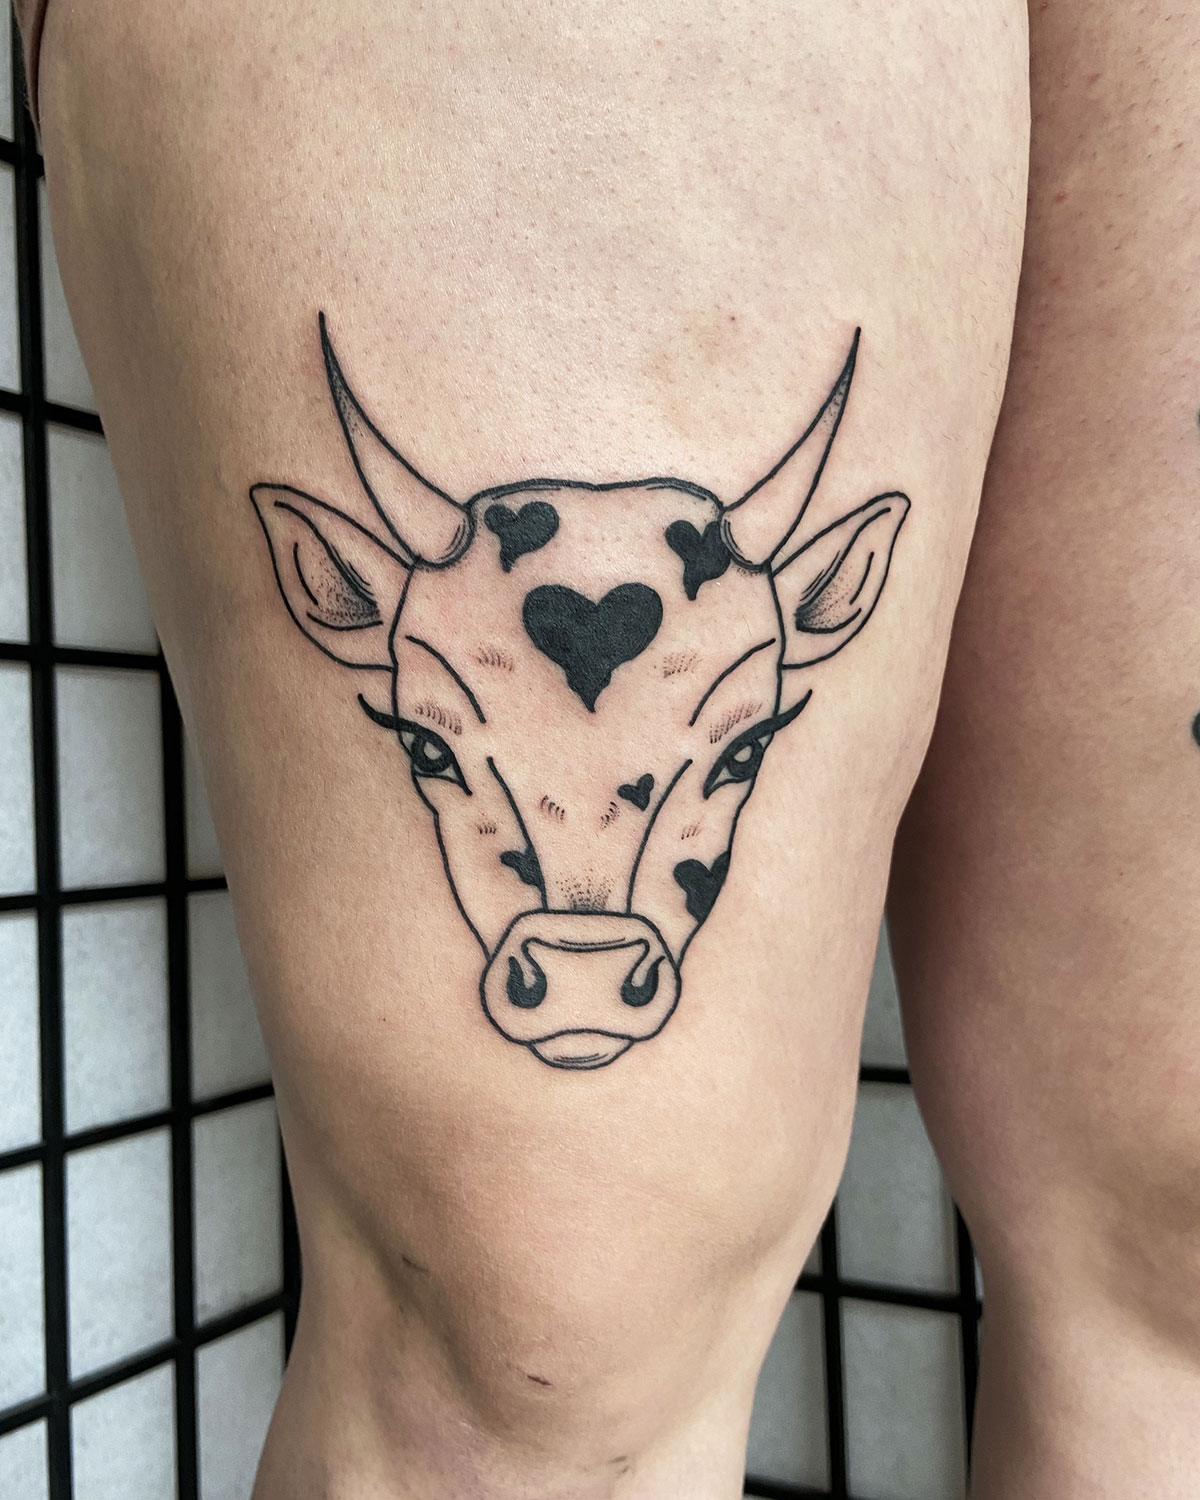 Update More Than Cow Tattoo Images In Cdgdbentre